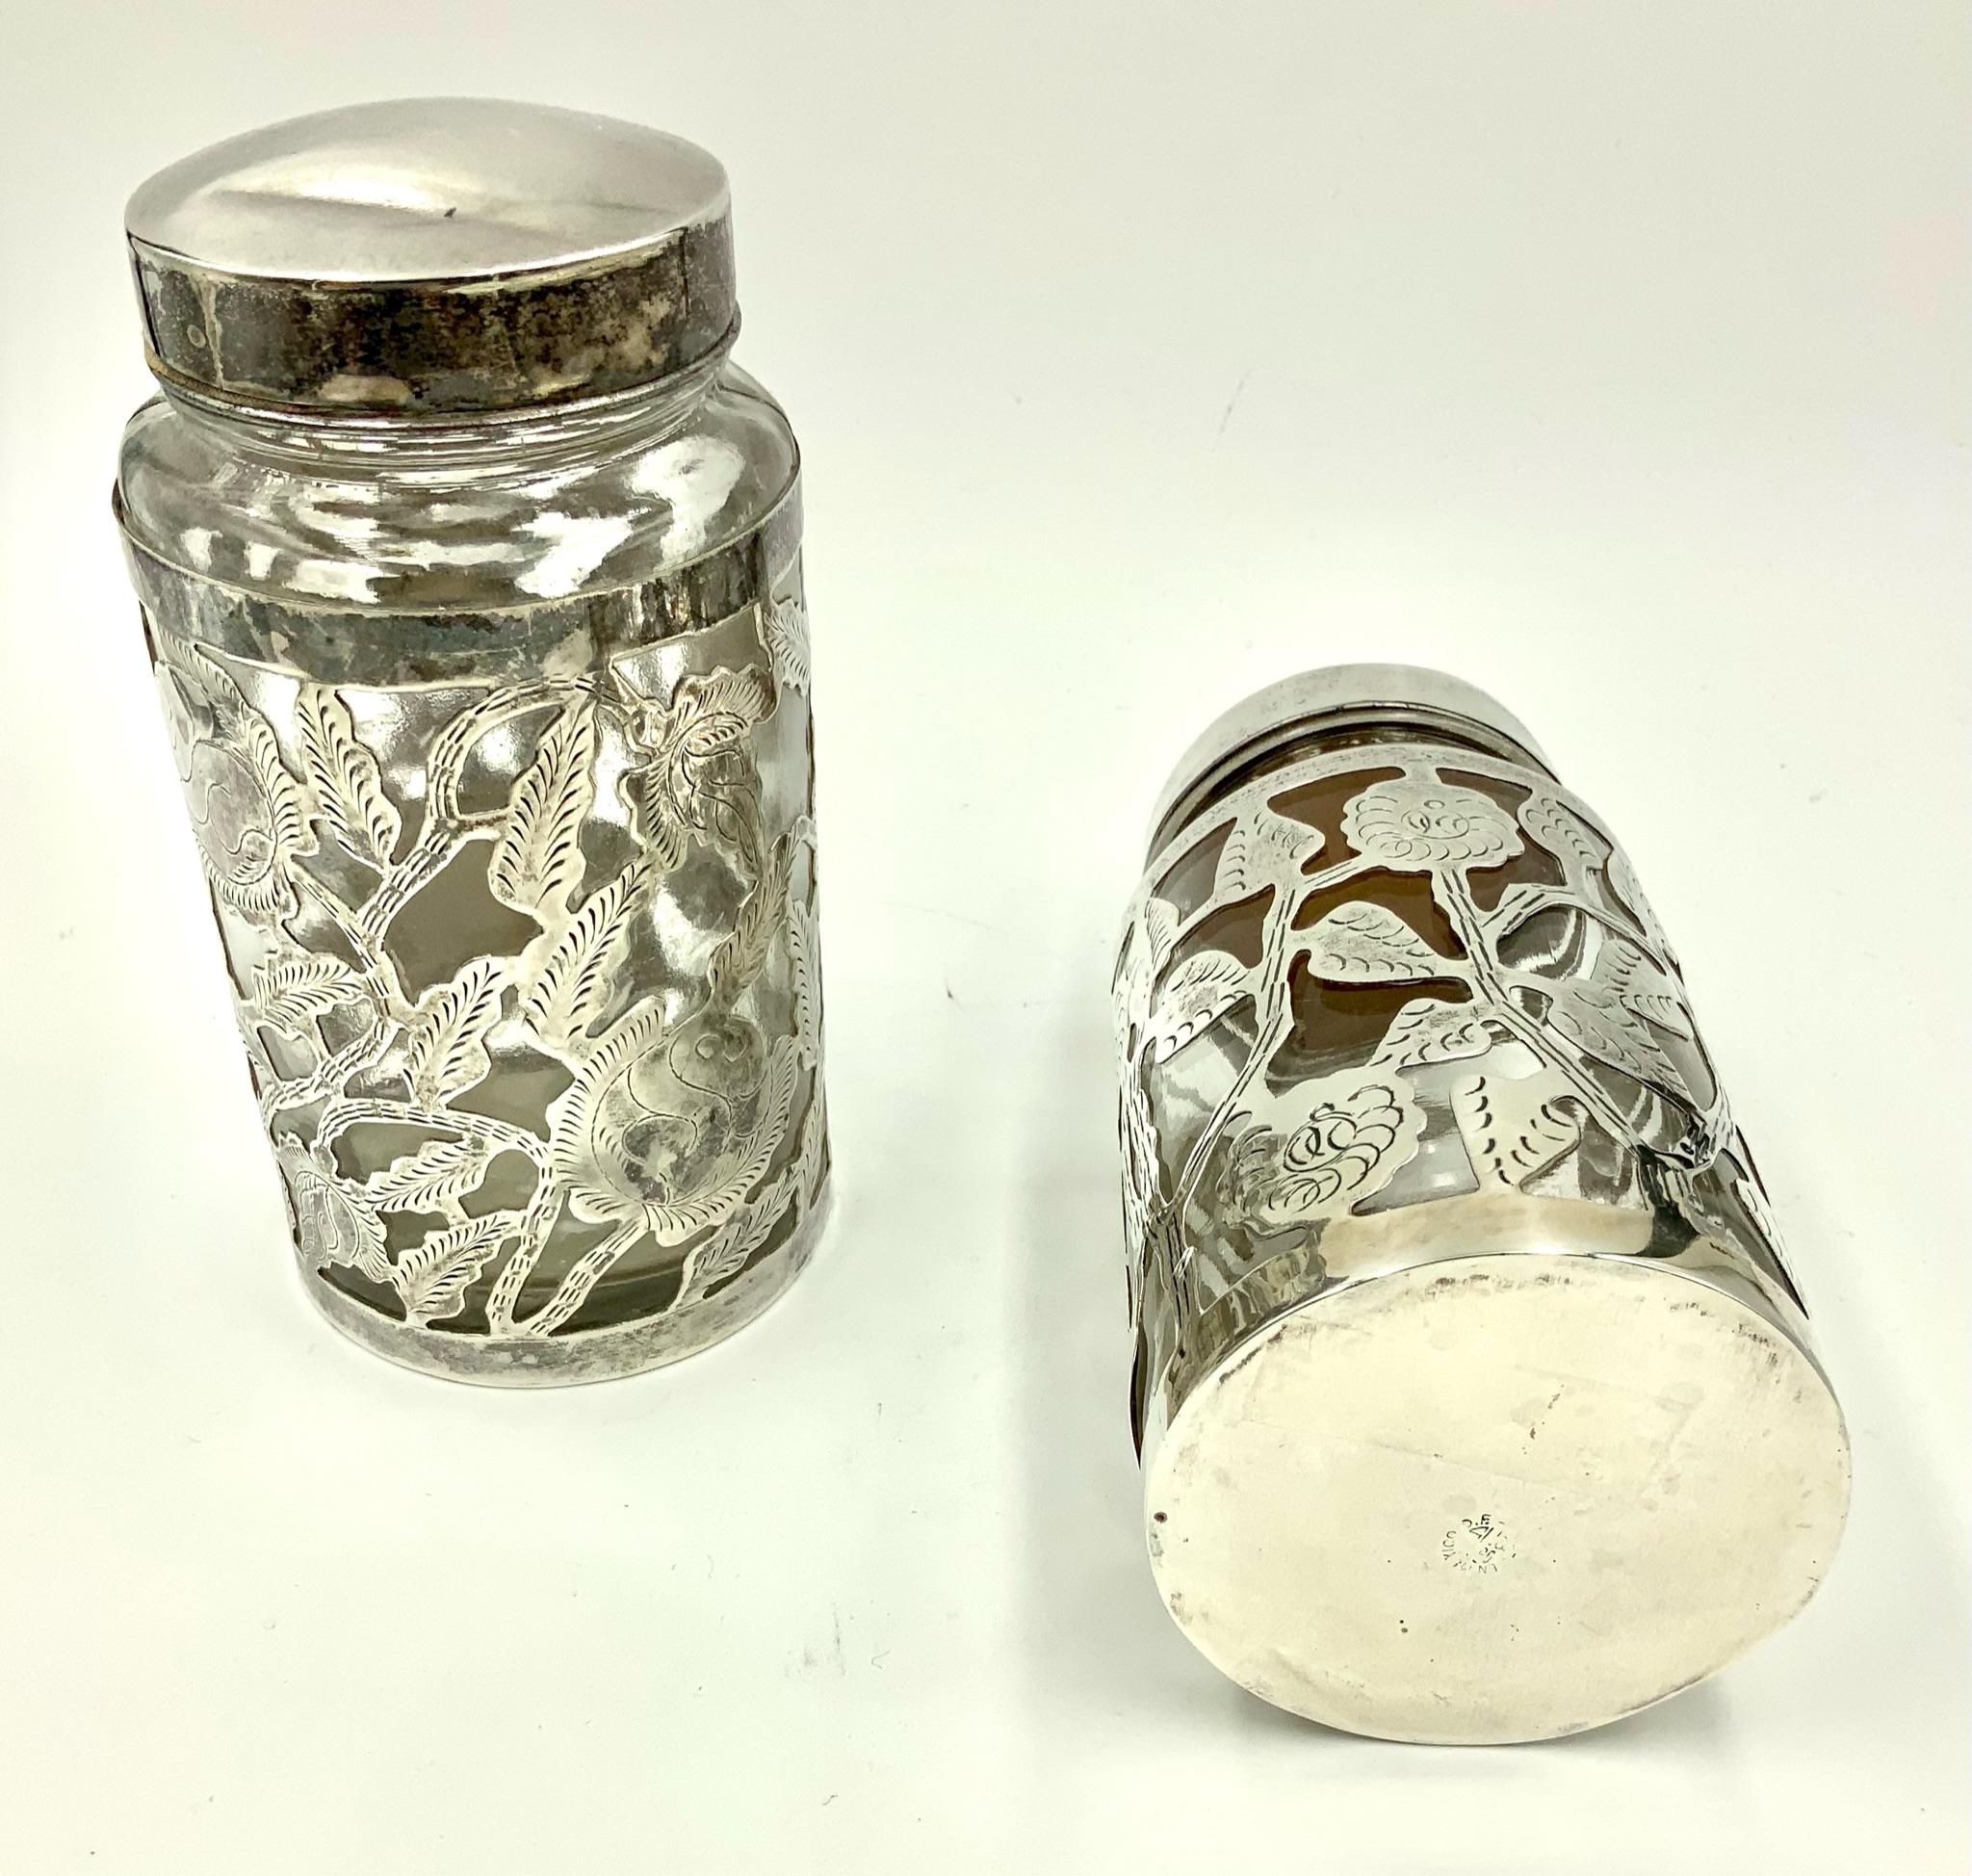 Pair of vintage Mexican etched floral sterling overlay glass jars with simple sterling screw on caps. These wonderful jars were produced in Mexico and feature a wonderful sterling overlay sleeve with an engraved floral flower and leaf design. The